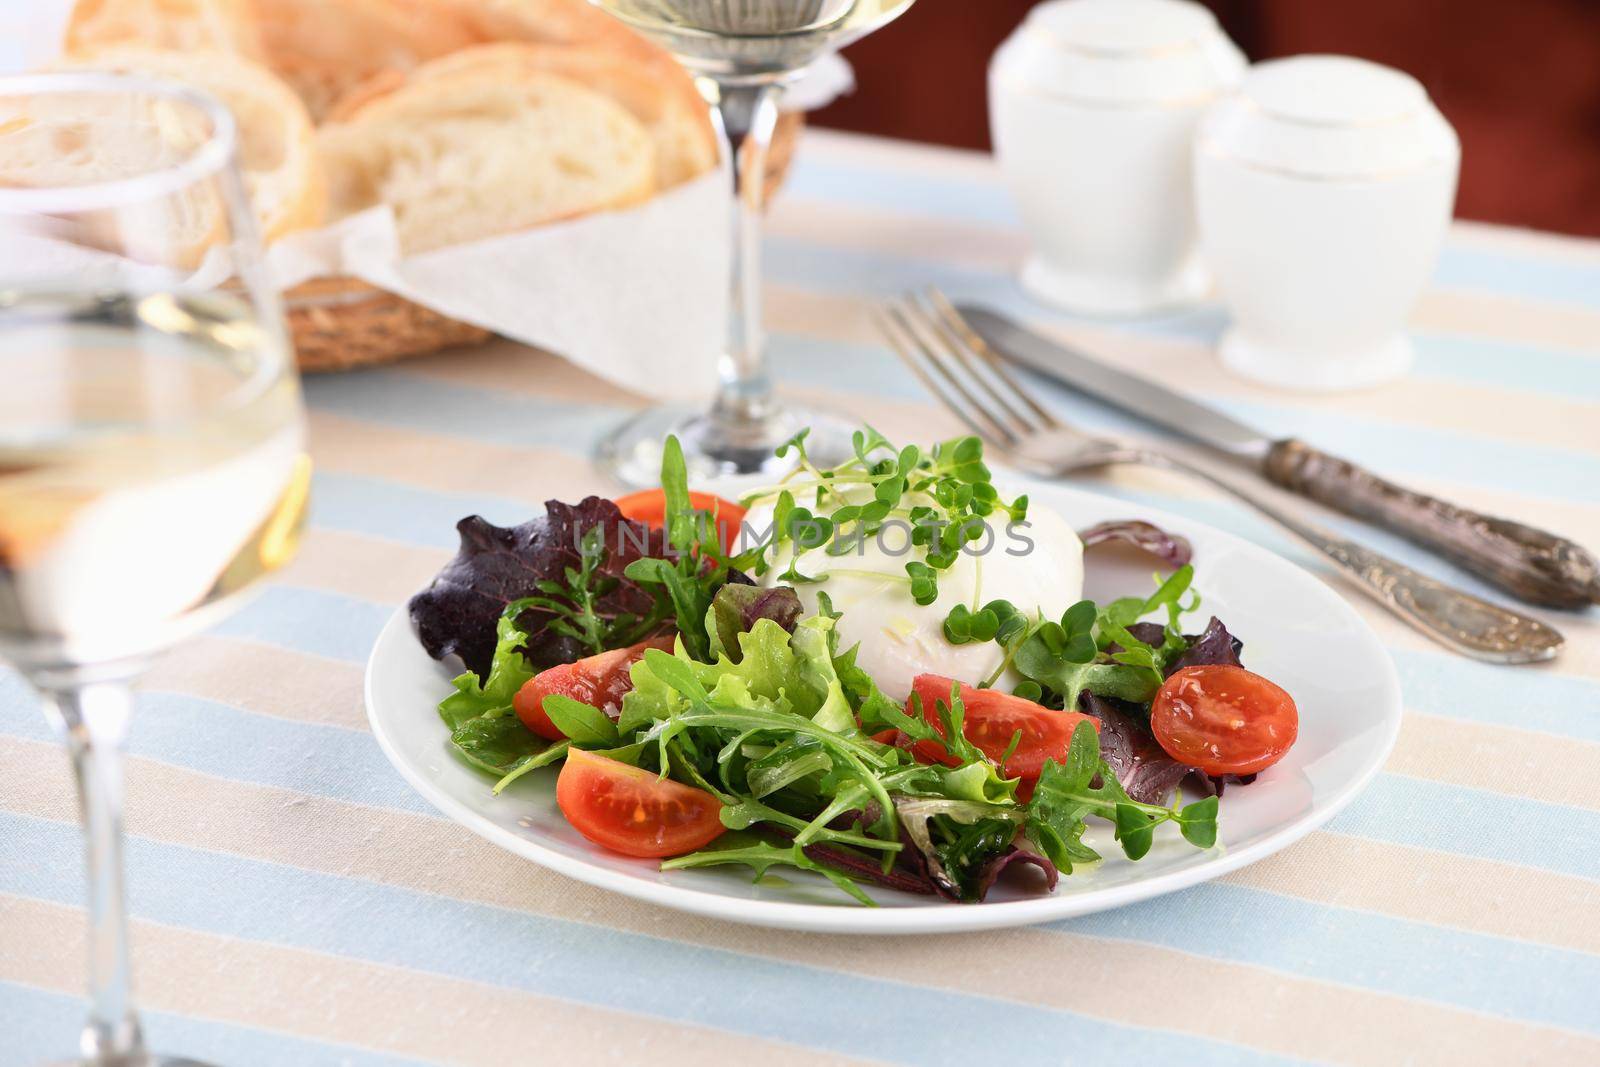 A healthy salad made from a lettuce leaves vegetables mix greens portion, arugula, tomatoes, radish sprouts and mozzarella cheese, olive oil and fresh bread, and a glass of white wine

